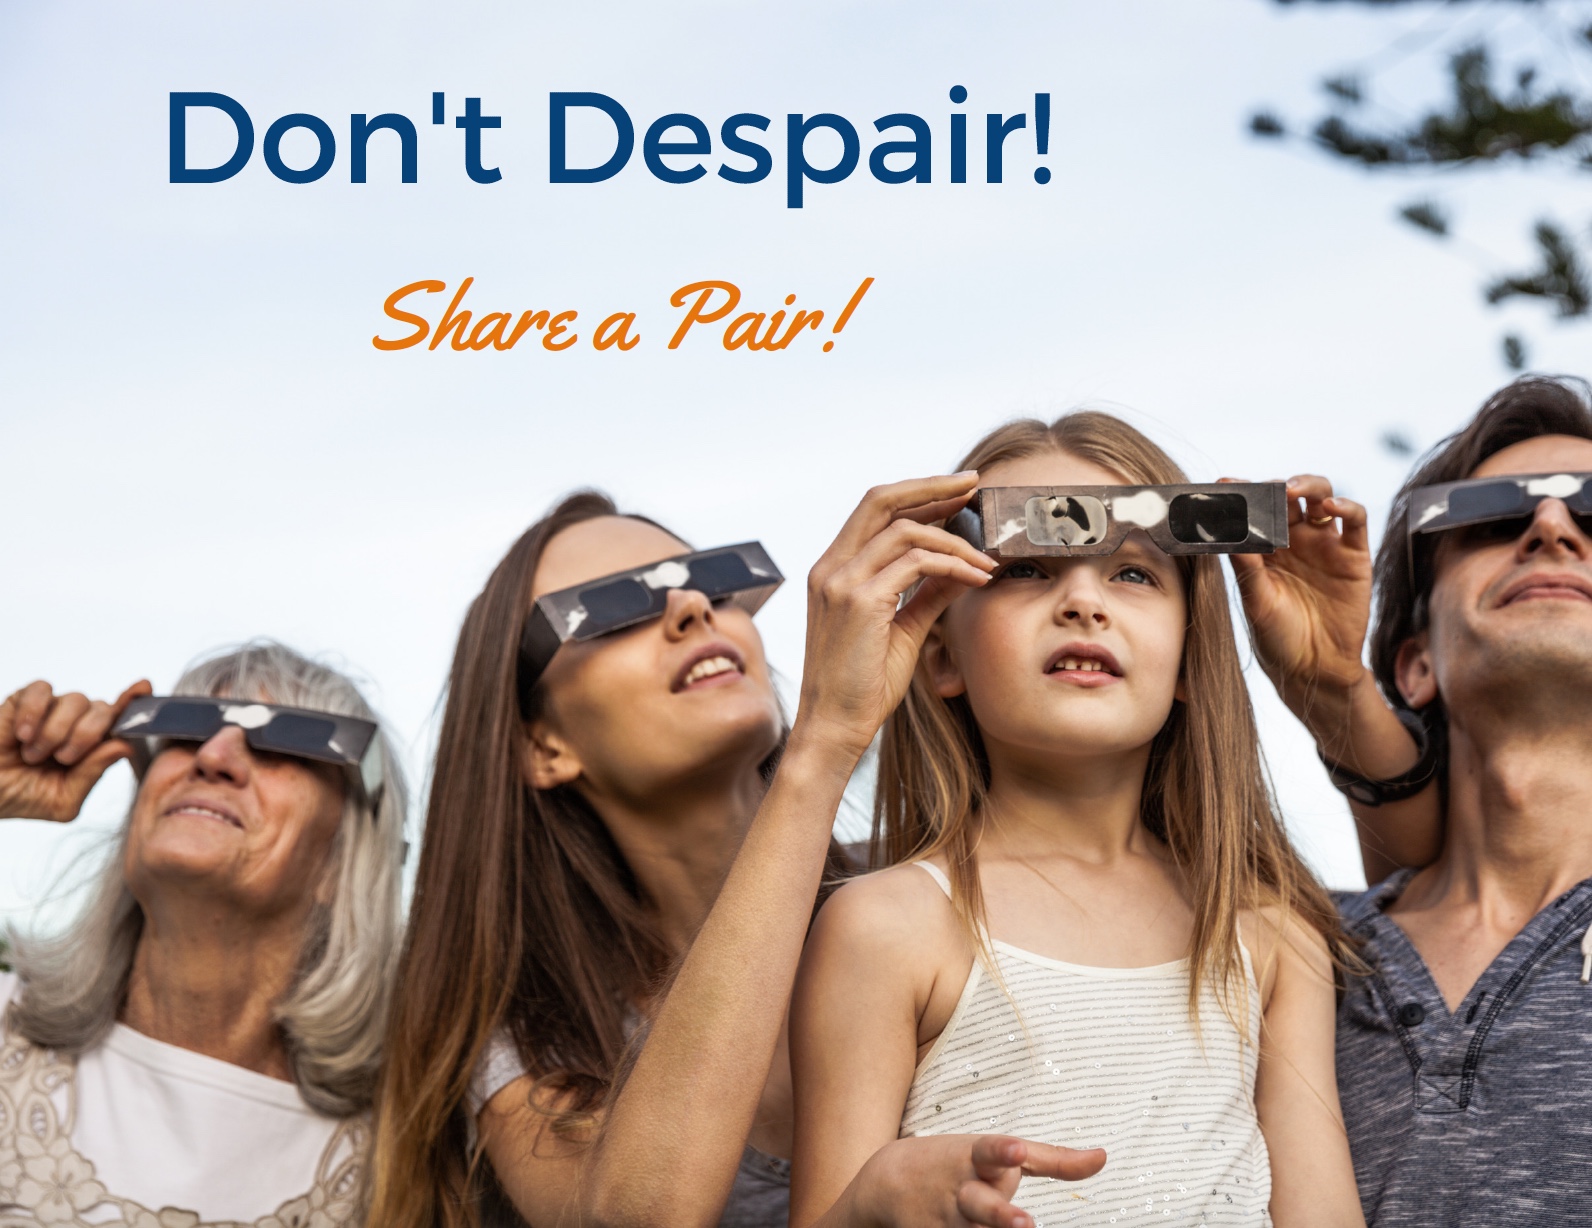 Share eclipse glasses to view partial eclipse